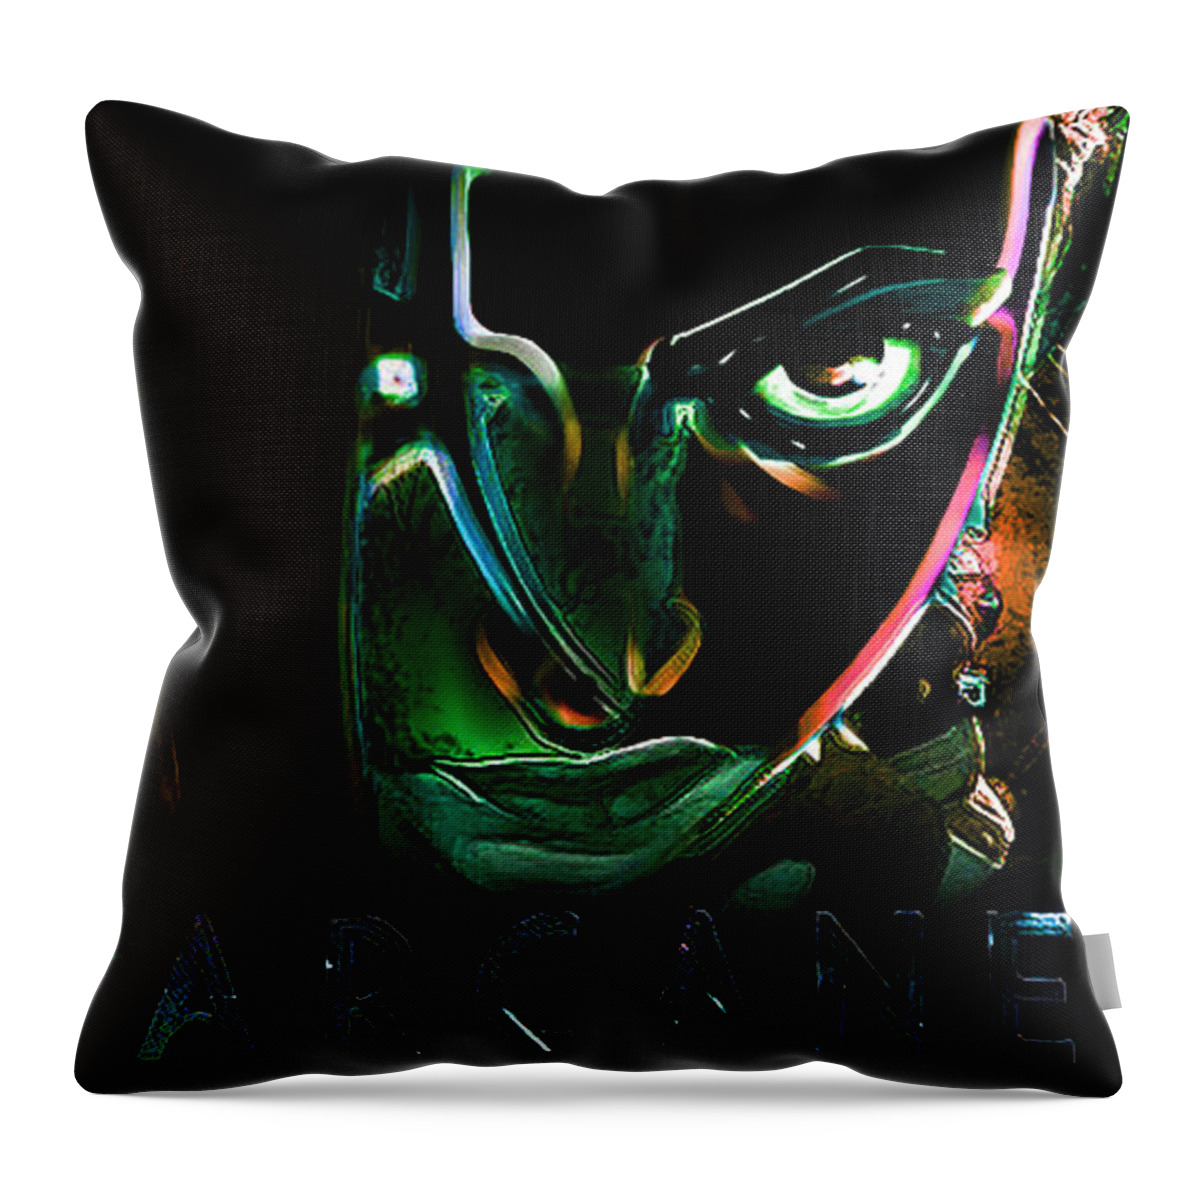 Jinx Unchained Throw Pillow featuring the digital art Jinx Unchained 2 by Aldane Wynter